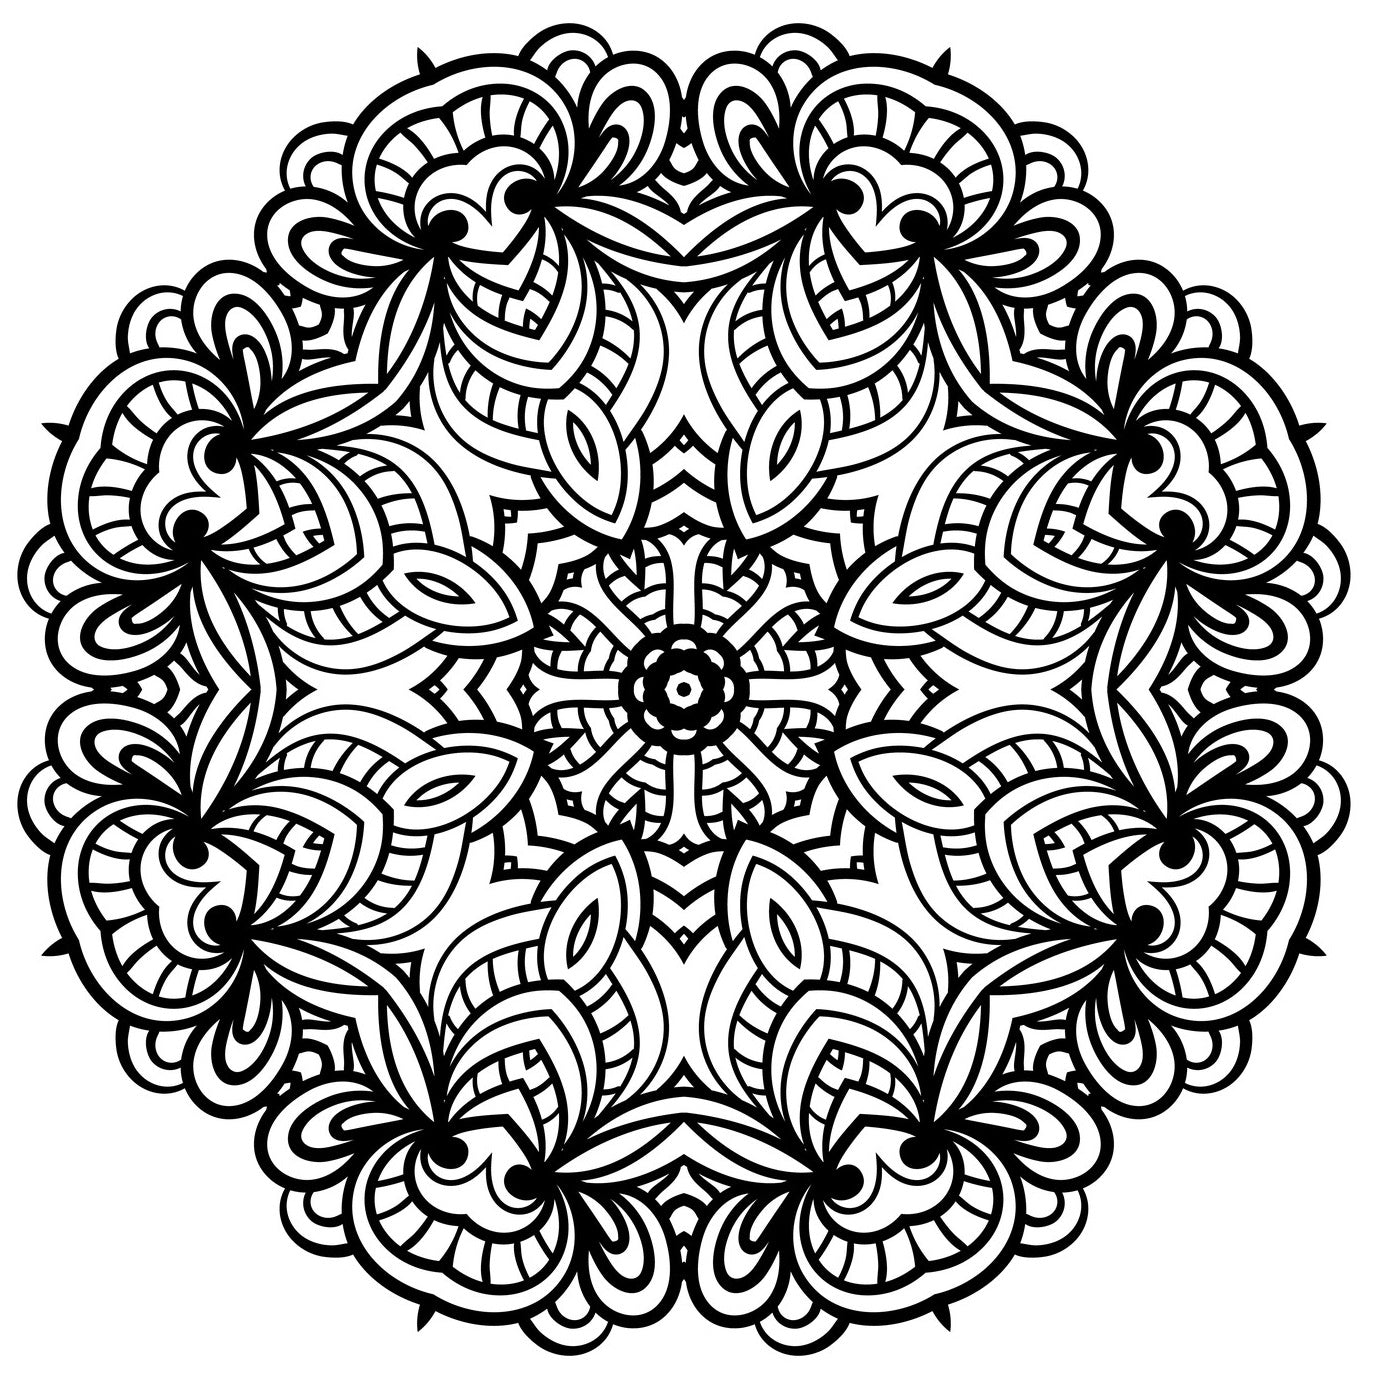 Mandala For Life - Seamless Relaxing Therapy Coloring Book